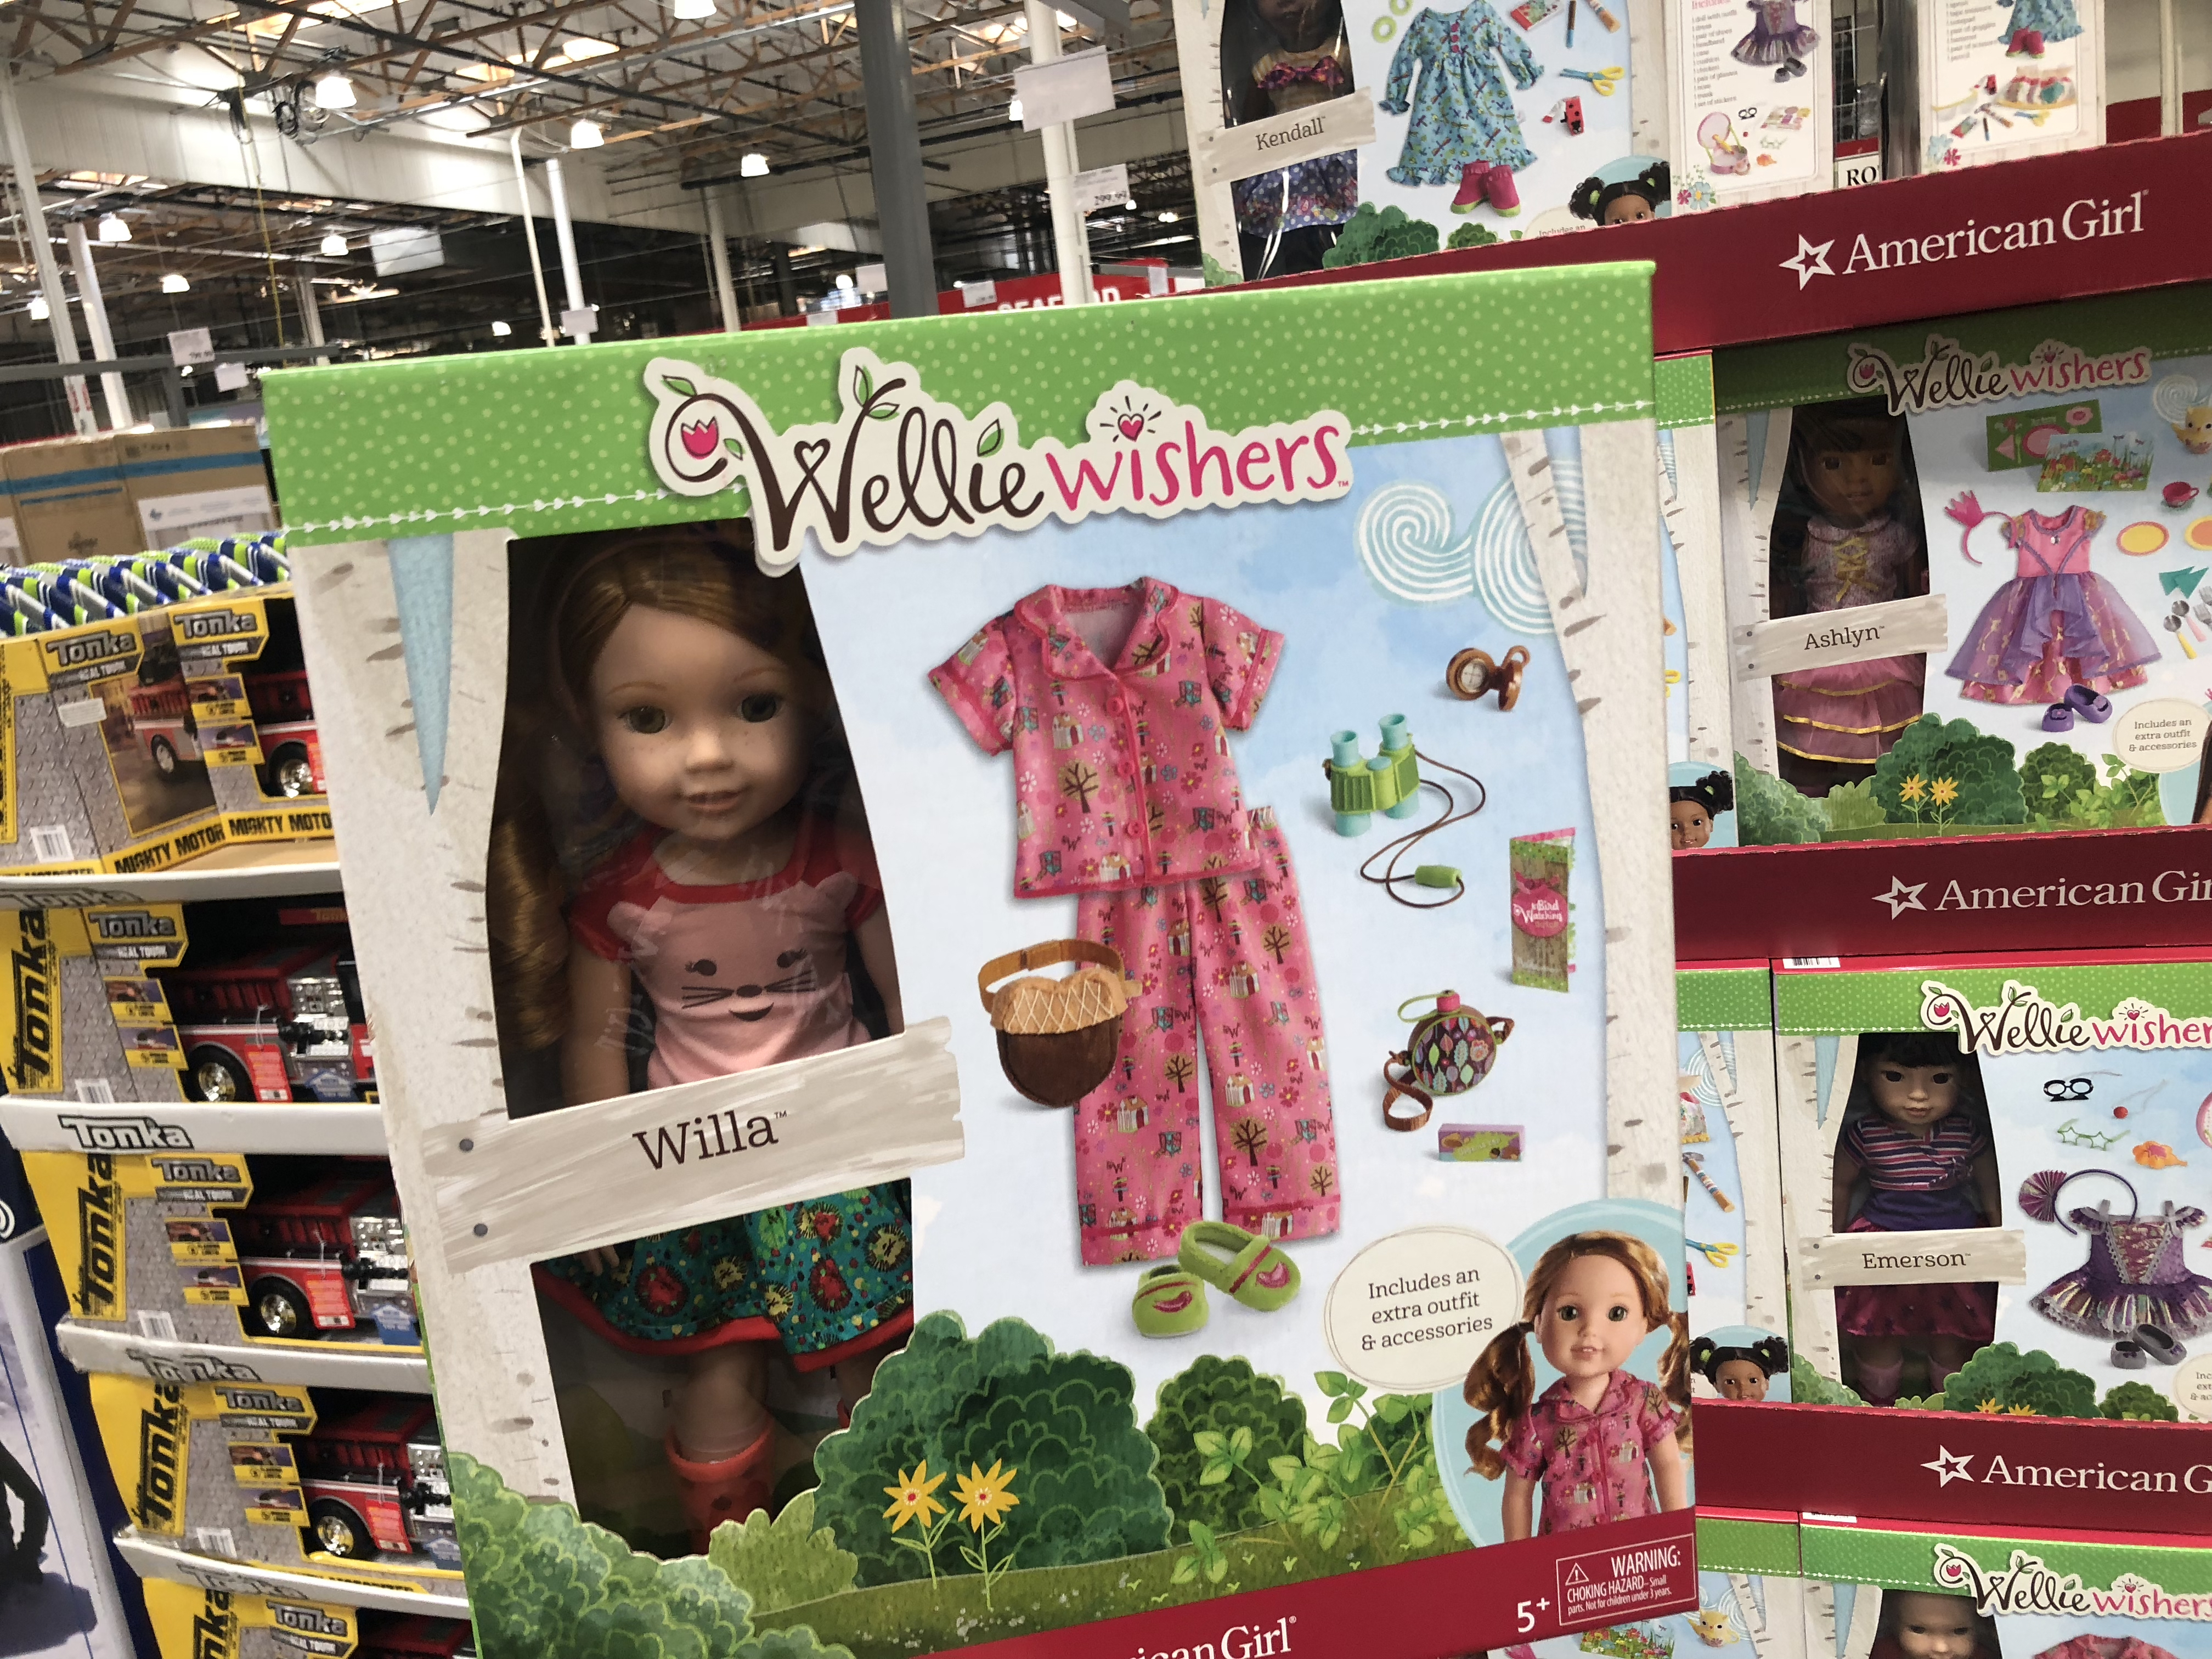 Costco Monthly Deals for September 2018 - American Girl WellieWishers at Costco